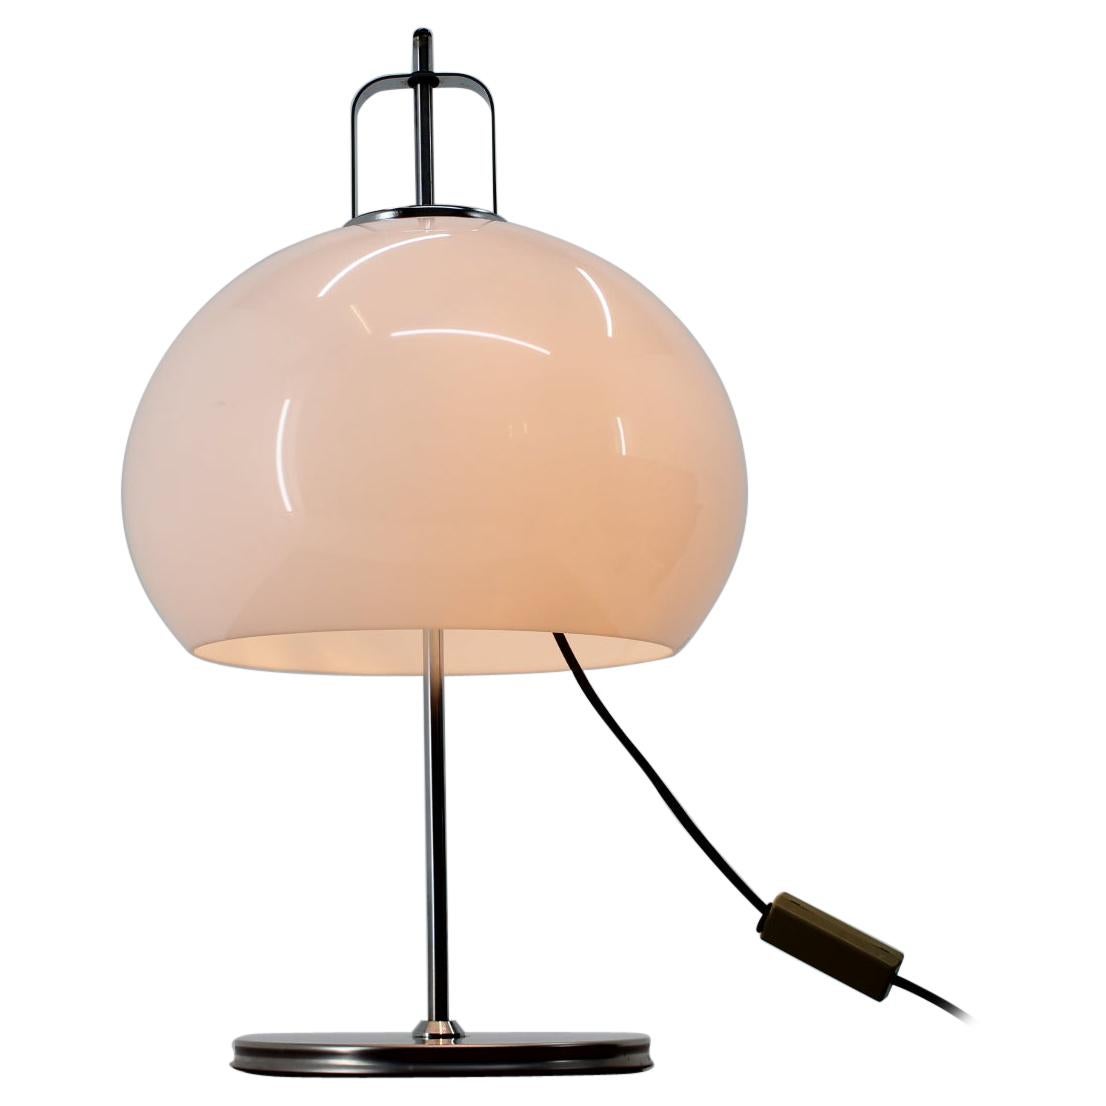 Big Midcentury Table Lamp by Meblo Designed by Harvey Guzzini, Italy, 1970s  For Sale at 1stDibs | meblo guzzini, meblo lamp, meblo guzzini table lamp